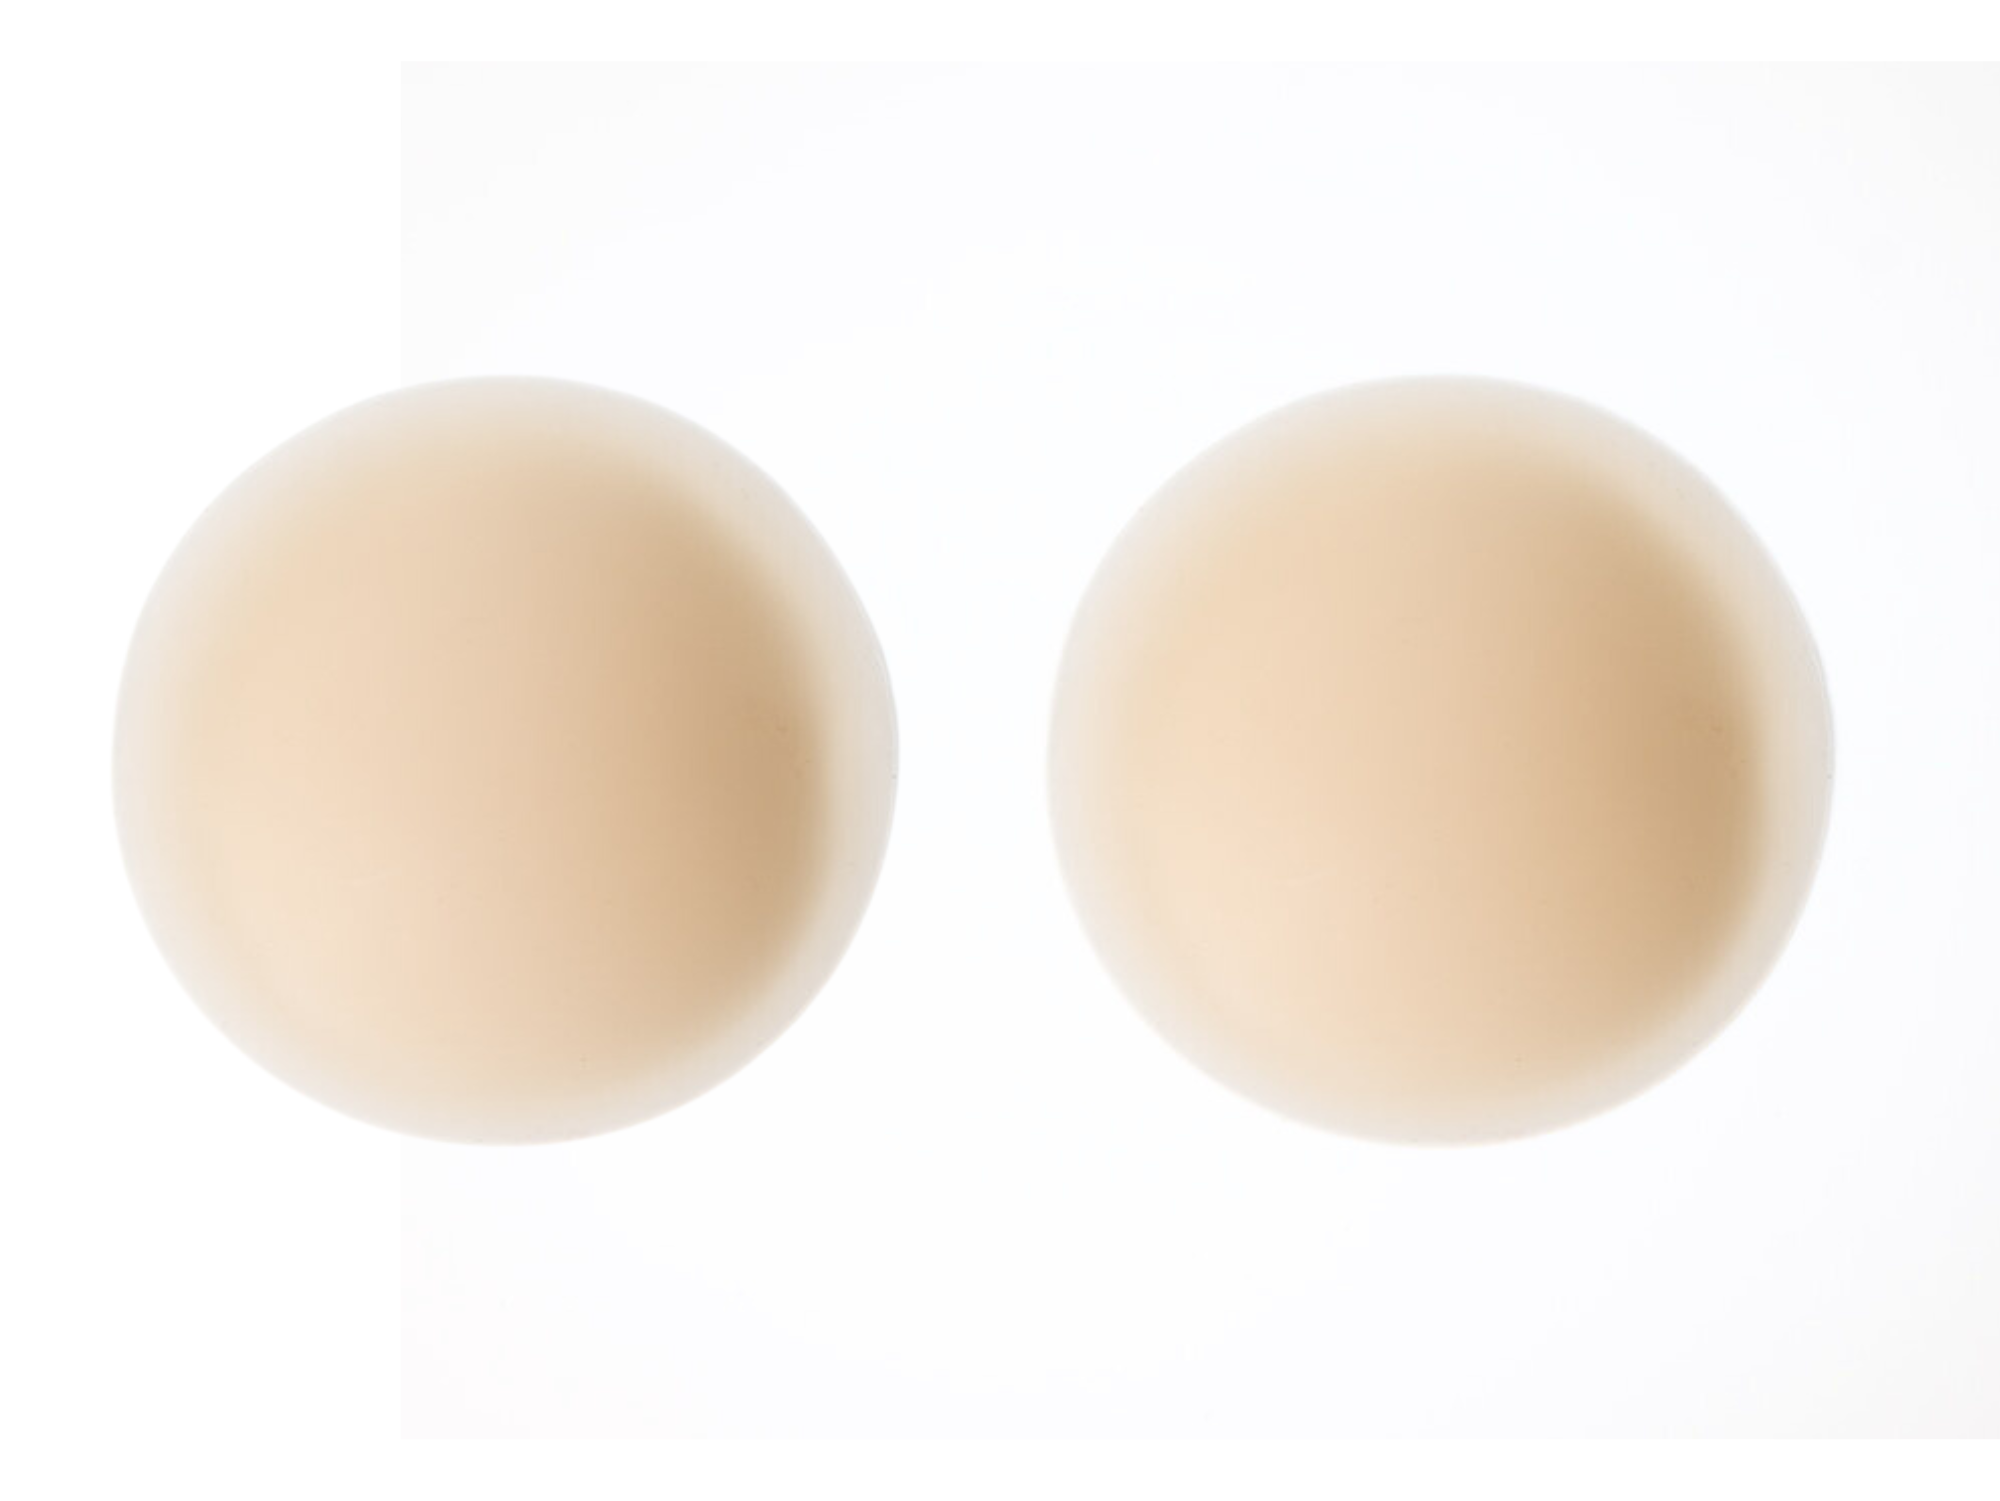 A pair of light flesh tone silicone nipple covers for tanned and brown skin.